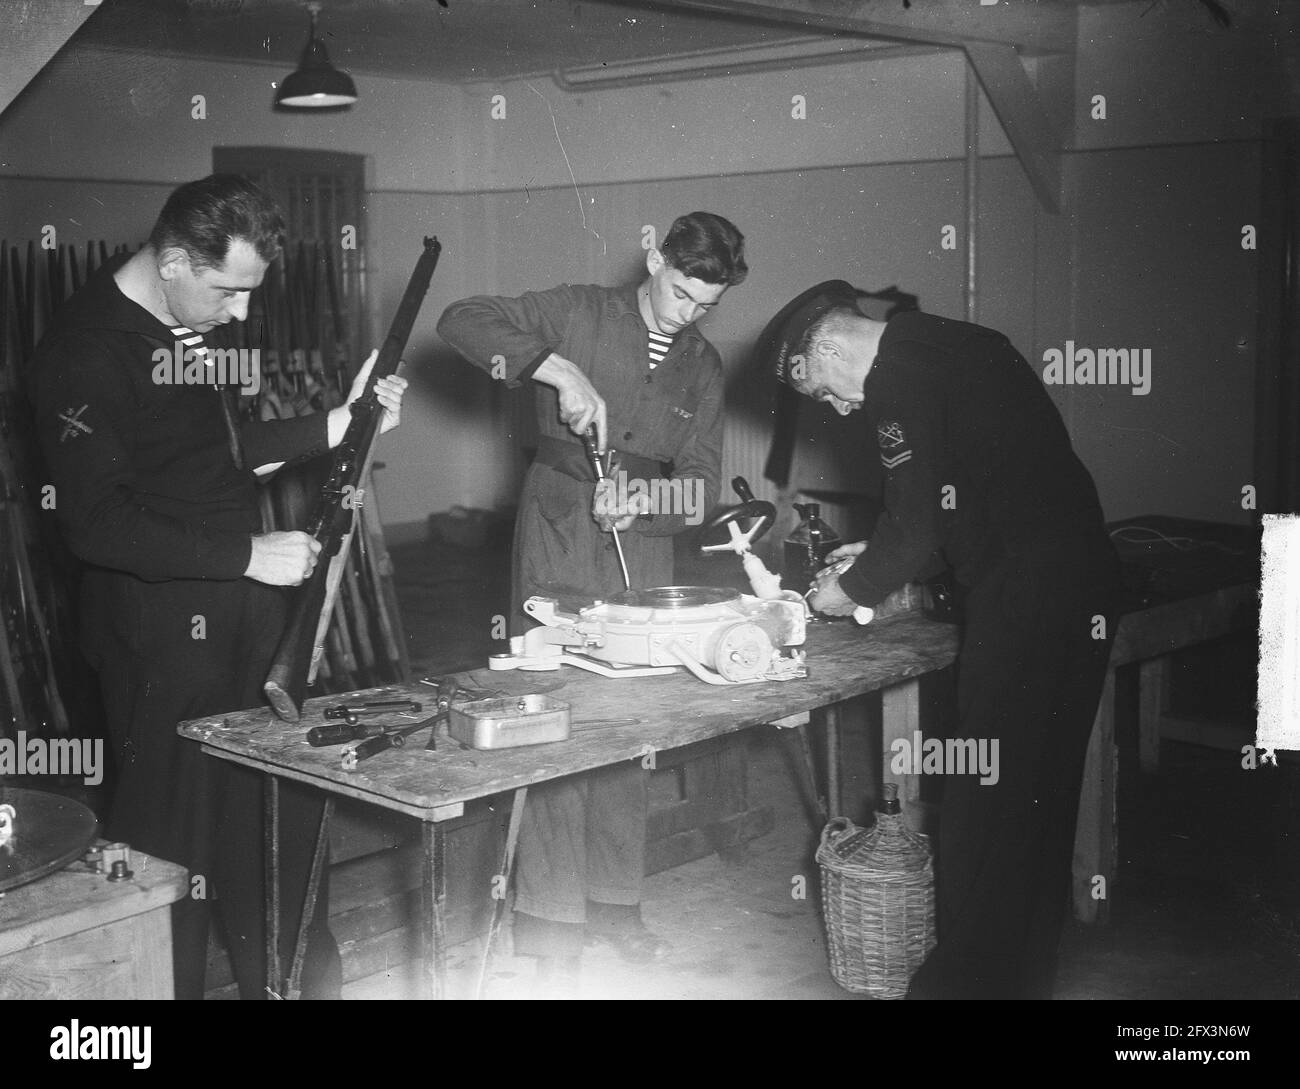 MOC-Hilversum, October 19, 1949, The Netherlands, 20th century press agency photo, news to remember, documentary, historic photography 1945-1990, visual stories, human history of the Twentieth Century, capturing moments in time Stock Photo